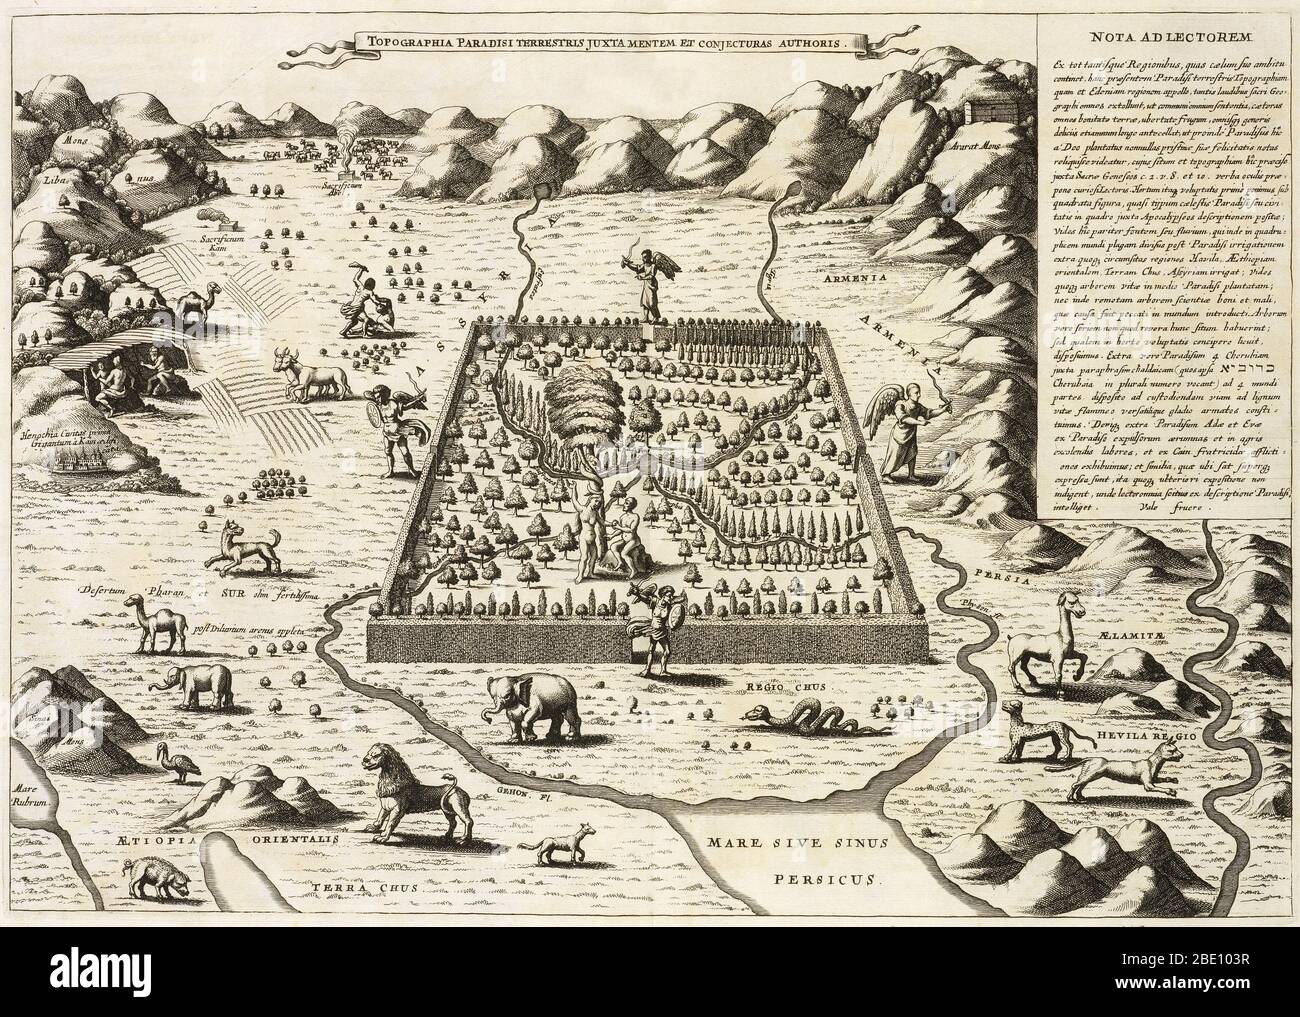 A depiction of the Garden of Eden and 'topography of the earthly paradise' by Athanasius Kircher (1602-1680), from 1675. Adam and Eve can be seen inside the walls, with angels at all four gates. Cain can be seen killing Abel at upper left outside the walls. Athanasius Kircher was a 17th-century German Jesuit scholar and polymath who published around 40 major works, most notably in the fields of 'Oriental studies,' geology, and medicine. Stock Photo